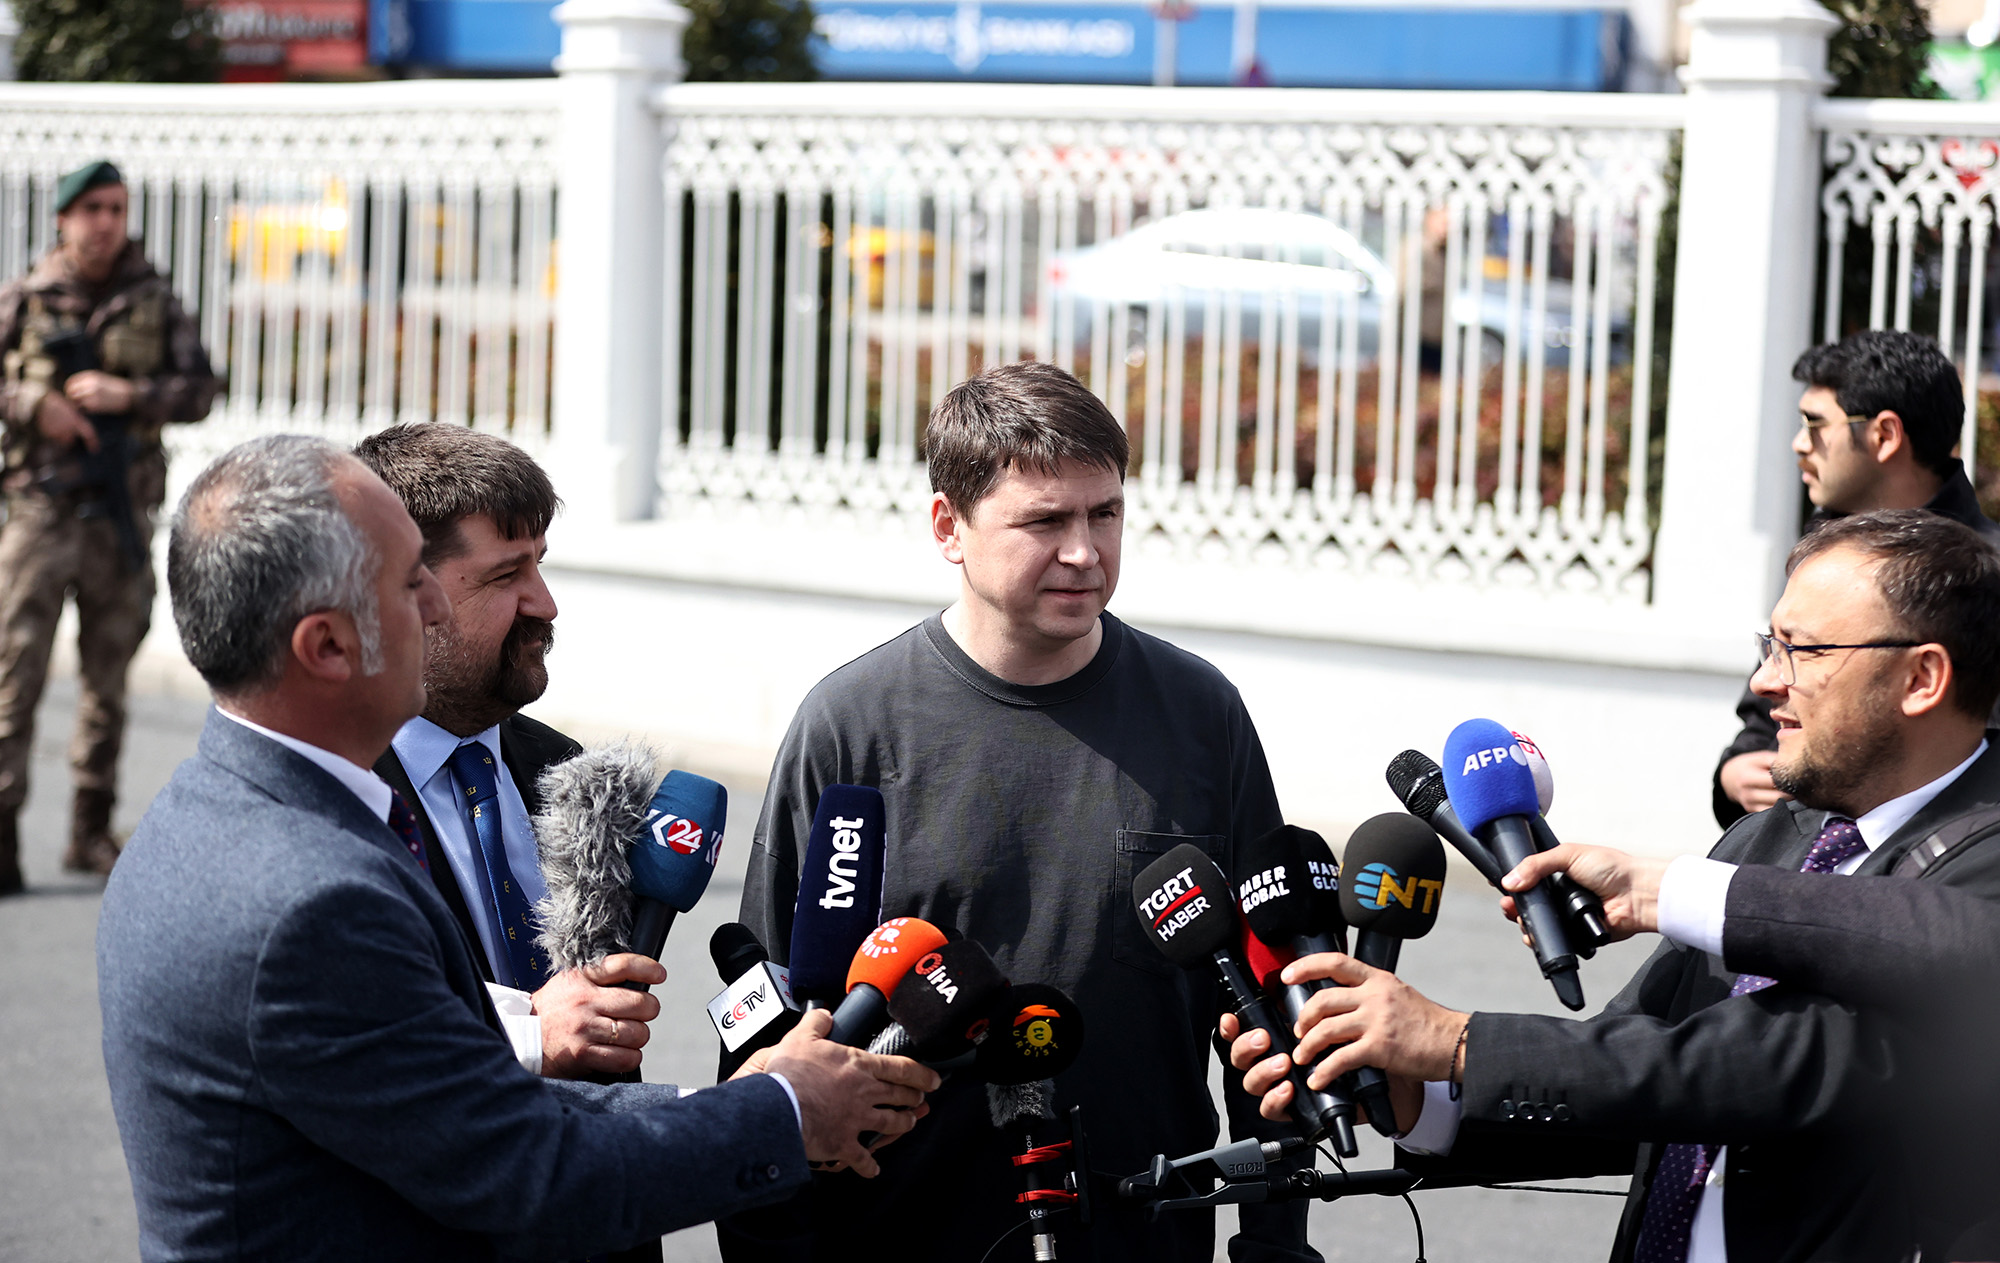 Ukrainian delegation member Mykhailo Podolyak makes a press statement after the talks between delegations from Russia and Ukraine at Dolmabahce Presidential Office in Istanbul, Turkey, on March 29.